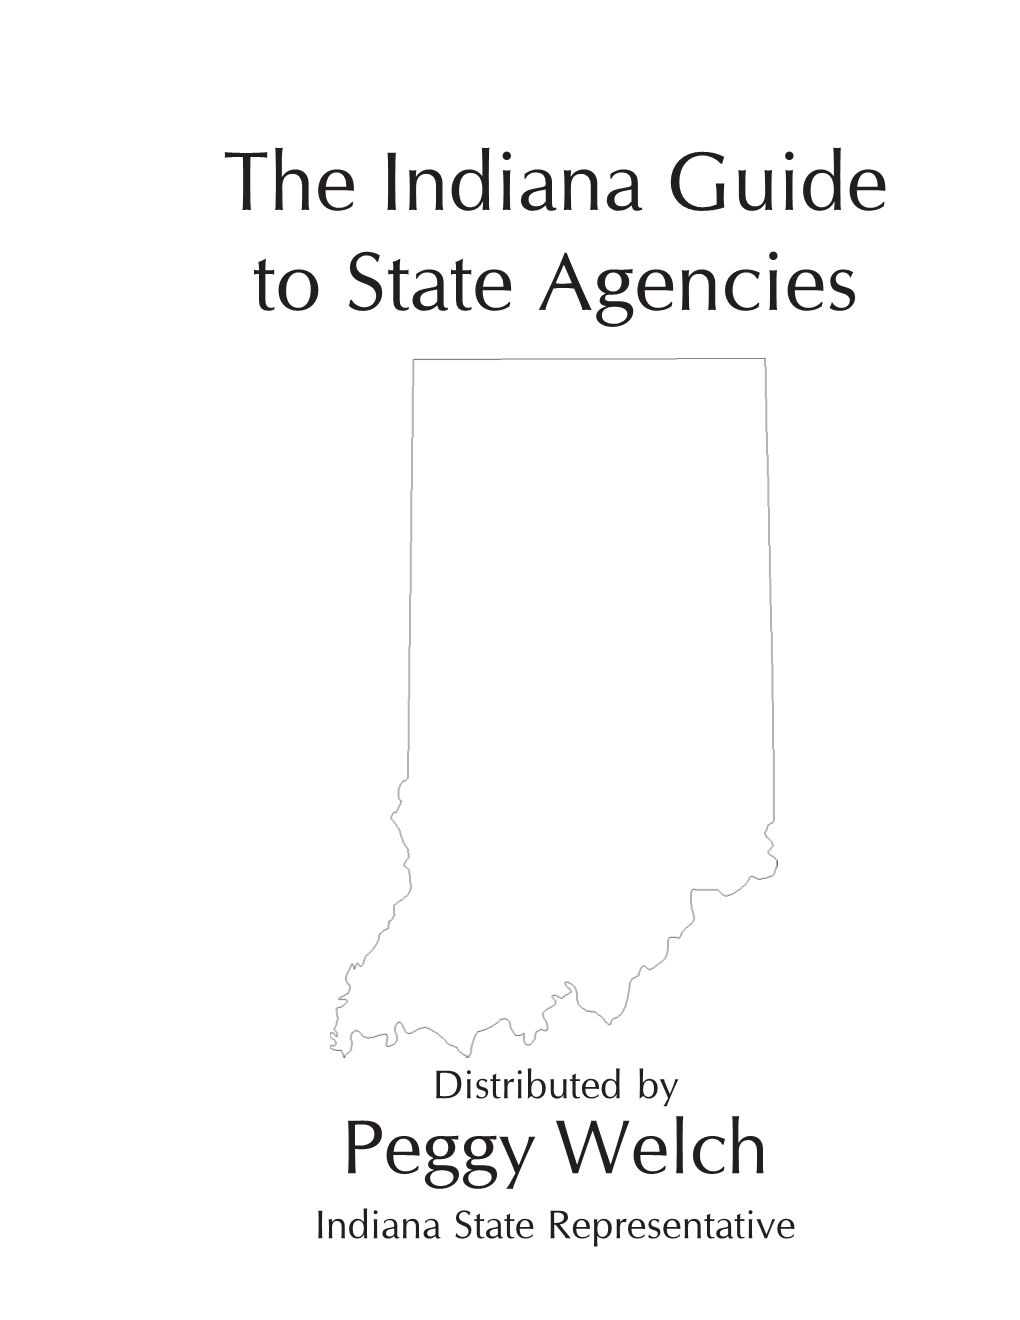 The Indiana Guide to State Agencies